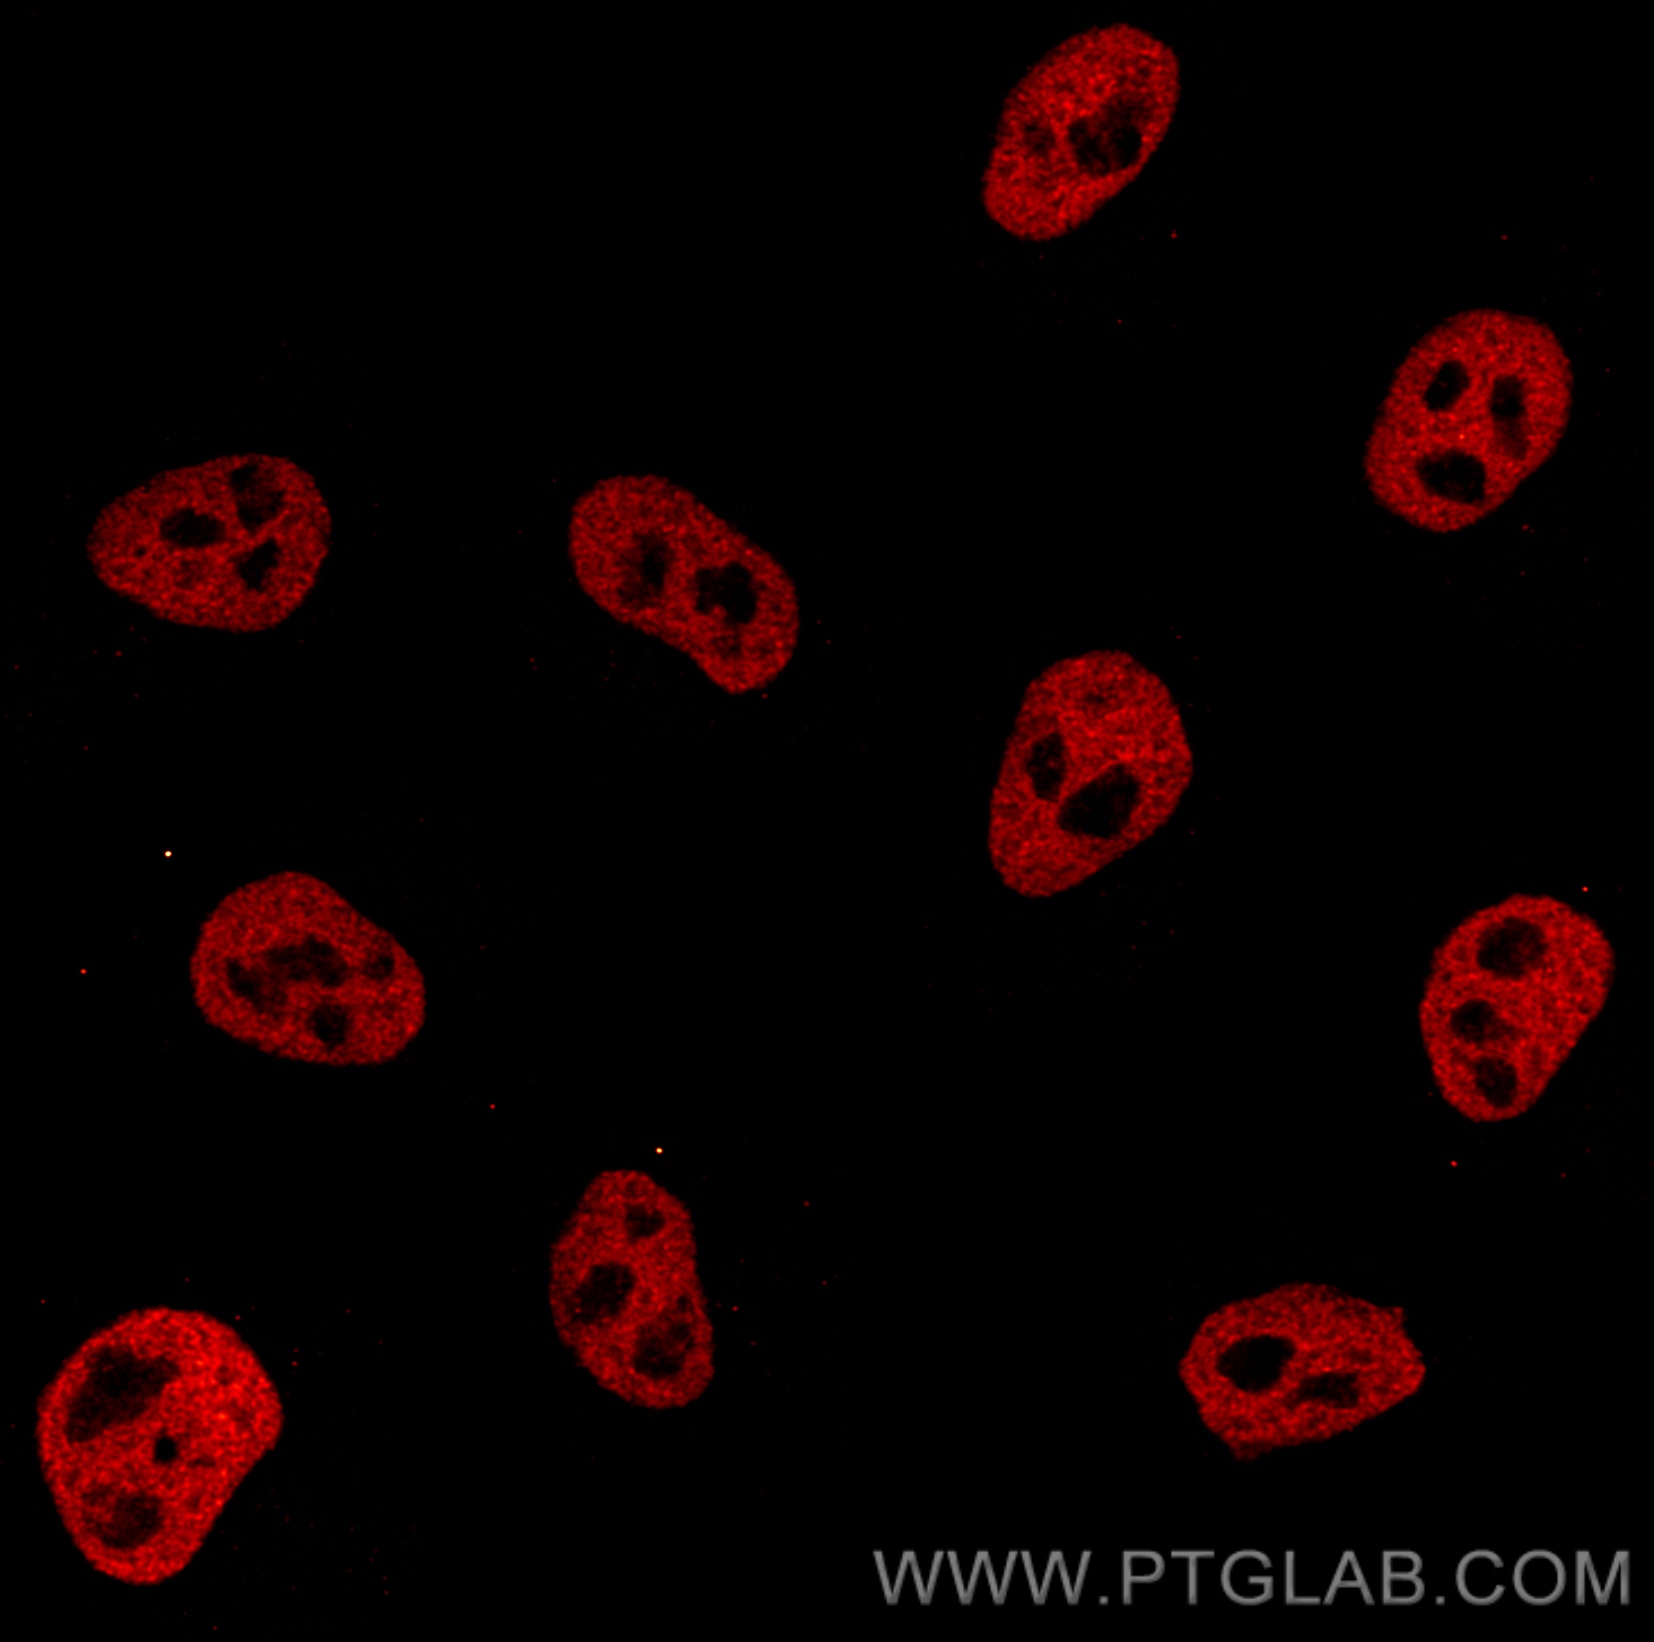 Immunofluorescence of HeLa: PFA-fixed HeLa cells were stained with anti-HDAC2 (67165-1-Ig) labeled with FlexAble CoraLite® Plus 555 Kit (KFA062, red). Confocal images were acquired with a 100x oil objective and post-processed. Images were recorded at the Core Facility Bioimaging at the Biomedical Center, LMU Munich.